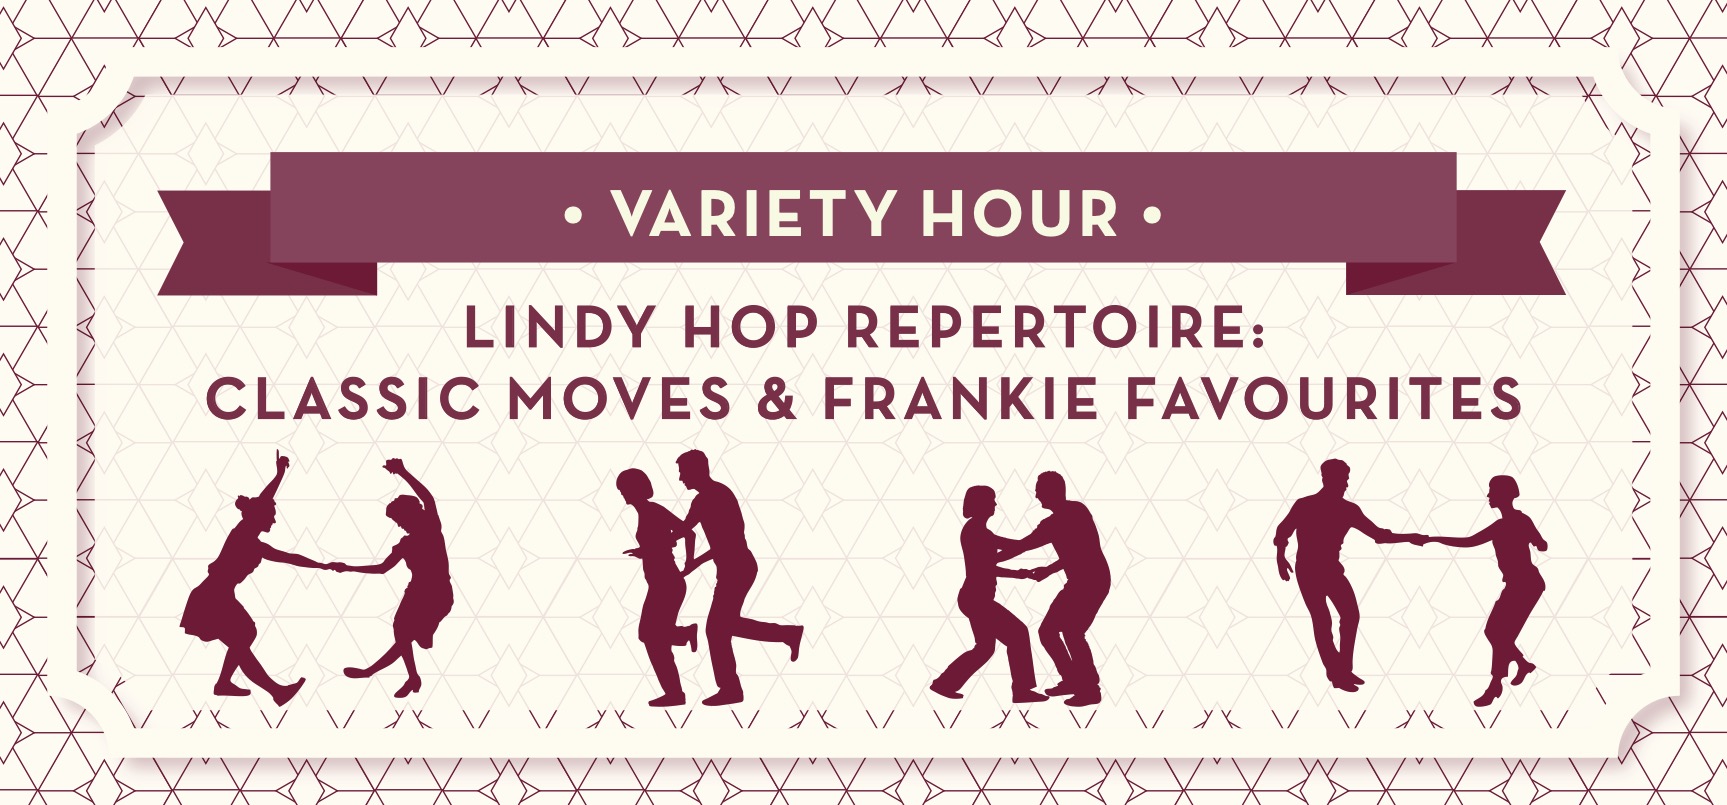 Variety Hour 06.24. Classic Moves